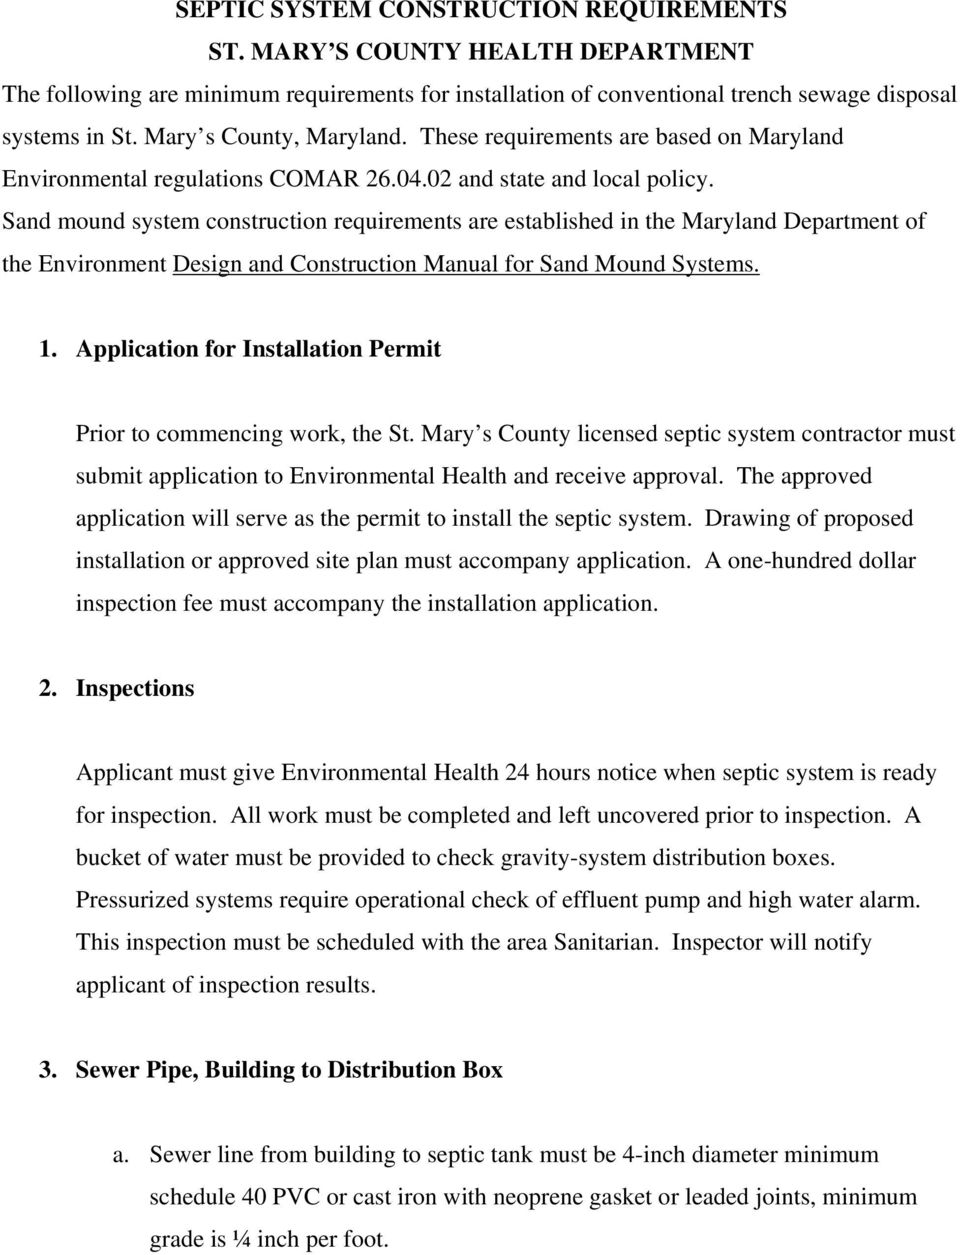 Septic System Construction Requirements St Mary S County Health Department - Pdf Free Download